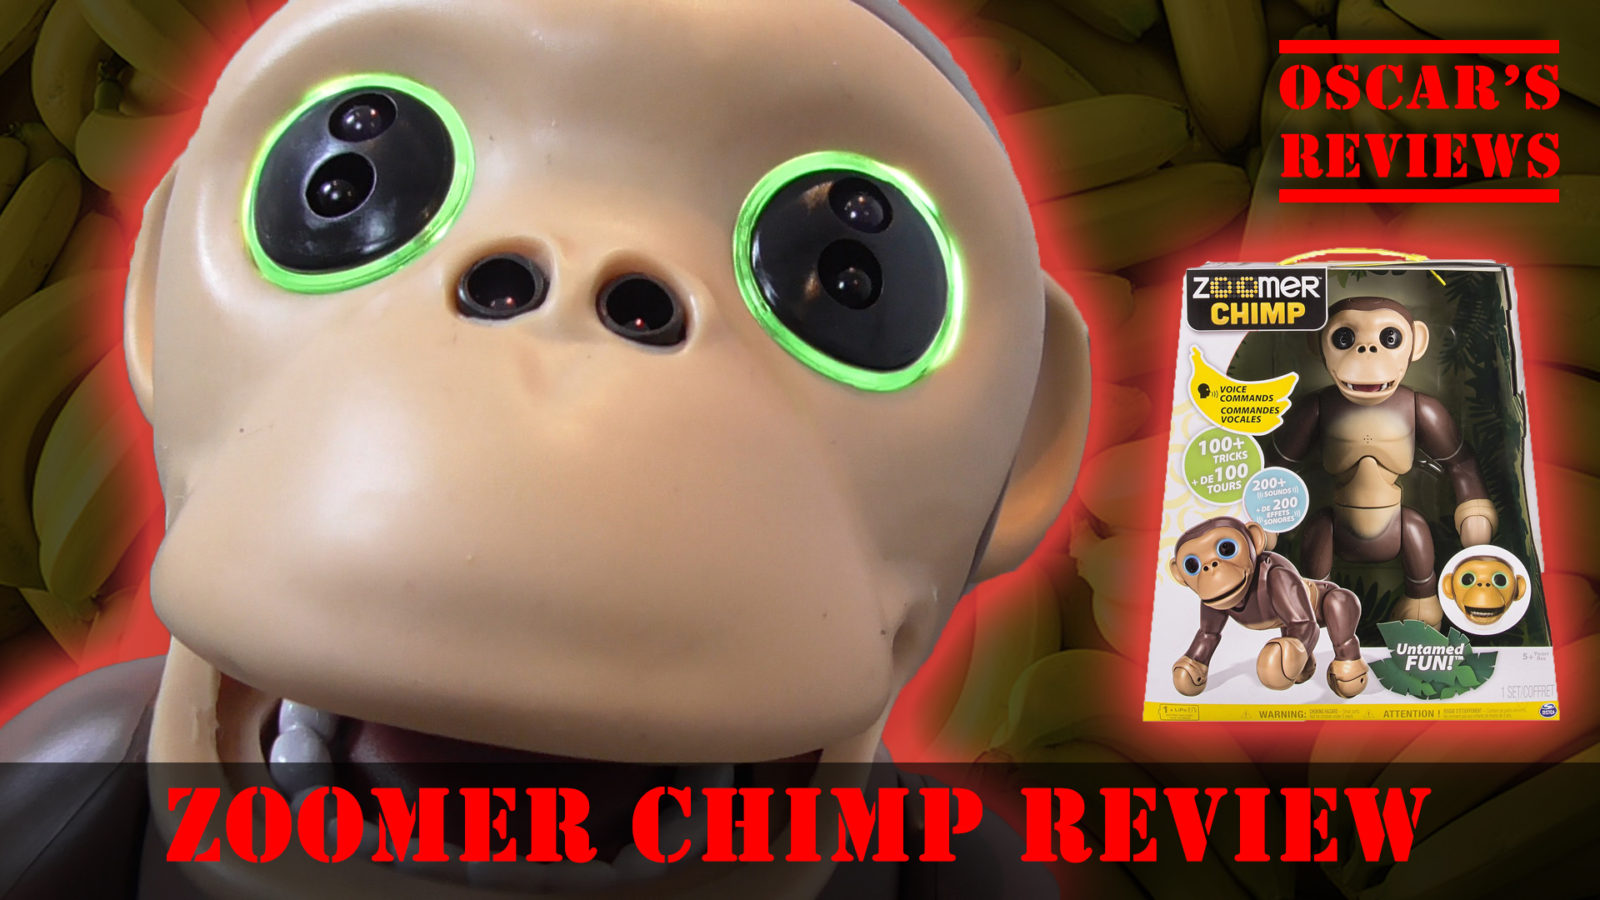 Zoomer Chimp: A Kids’ Review of SpinMaster’s Cheeky Monkey – Top Christmas Toys!